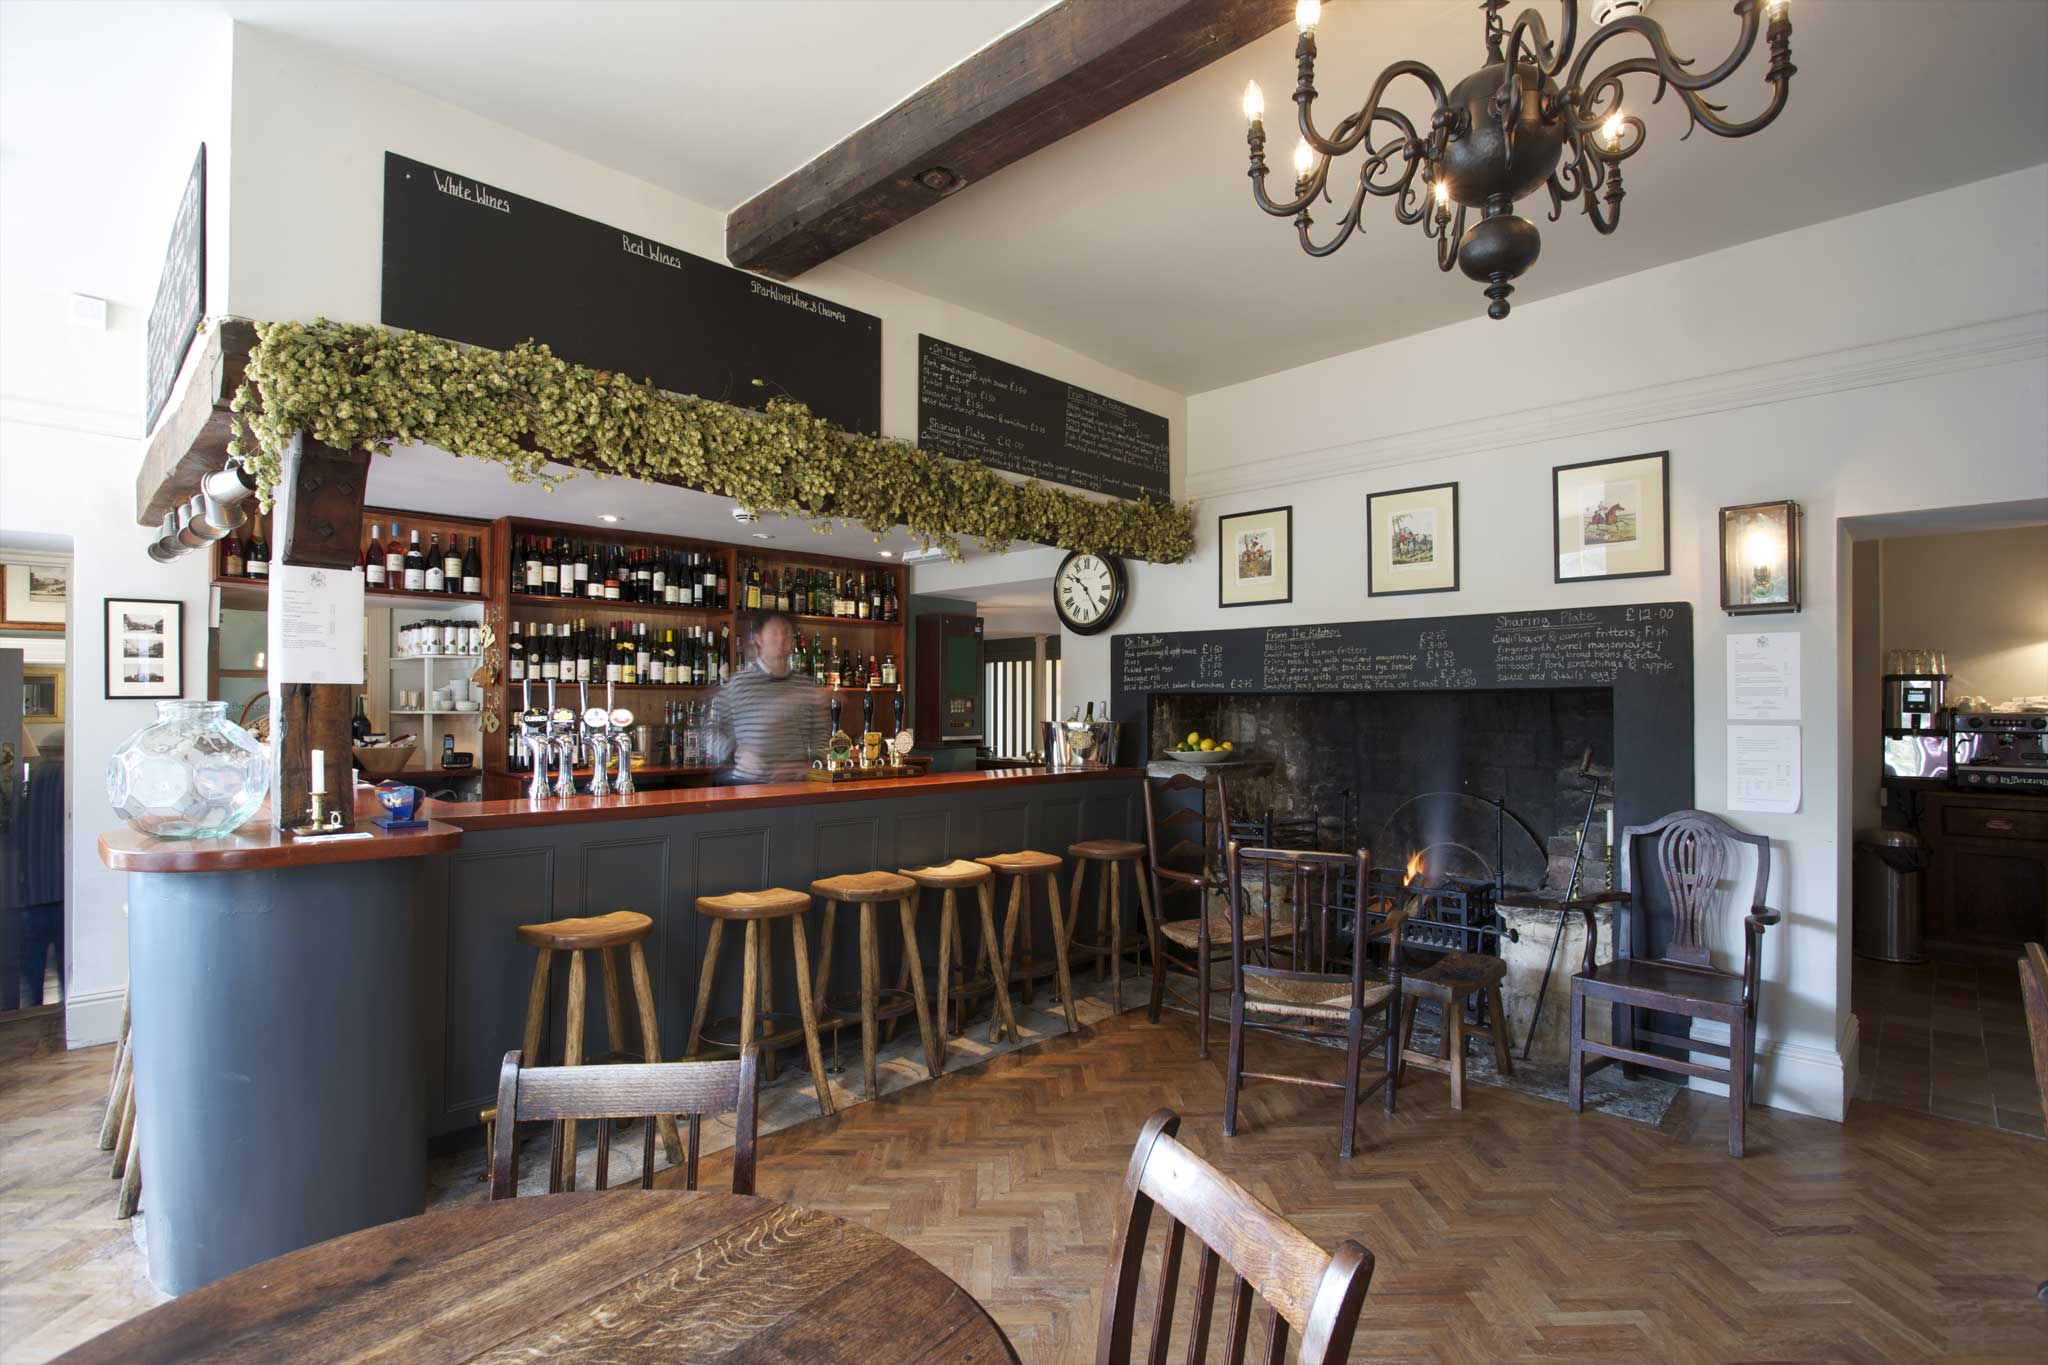 The Beckford Arms' bar has been modernised to look more like a sophisticated country house than a pub